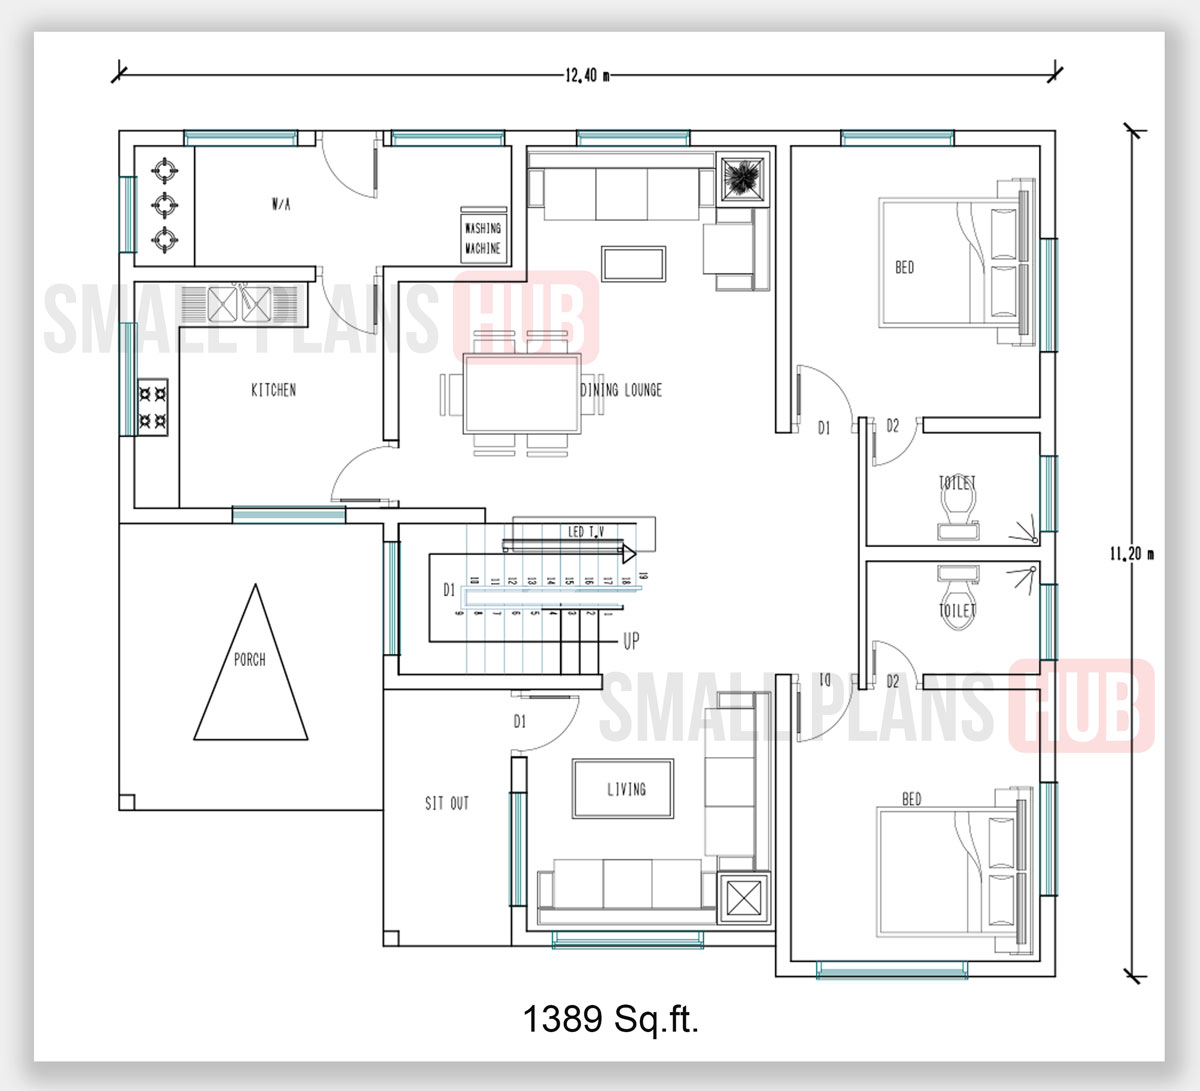 Kerala Style 3 Bedroom House Plan And Elevation Download For Free Small Plans Hub